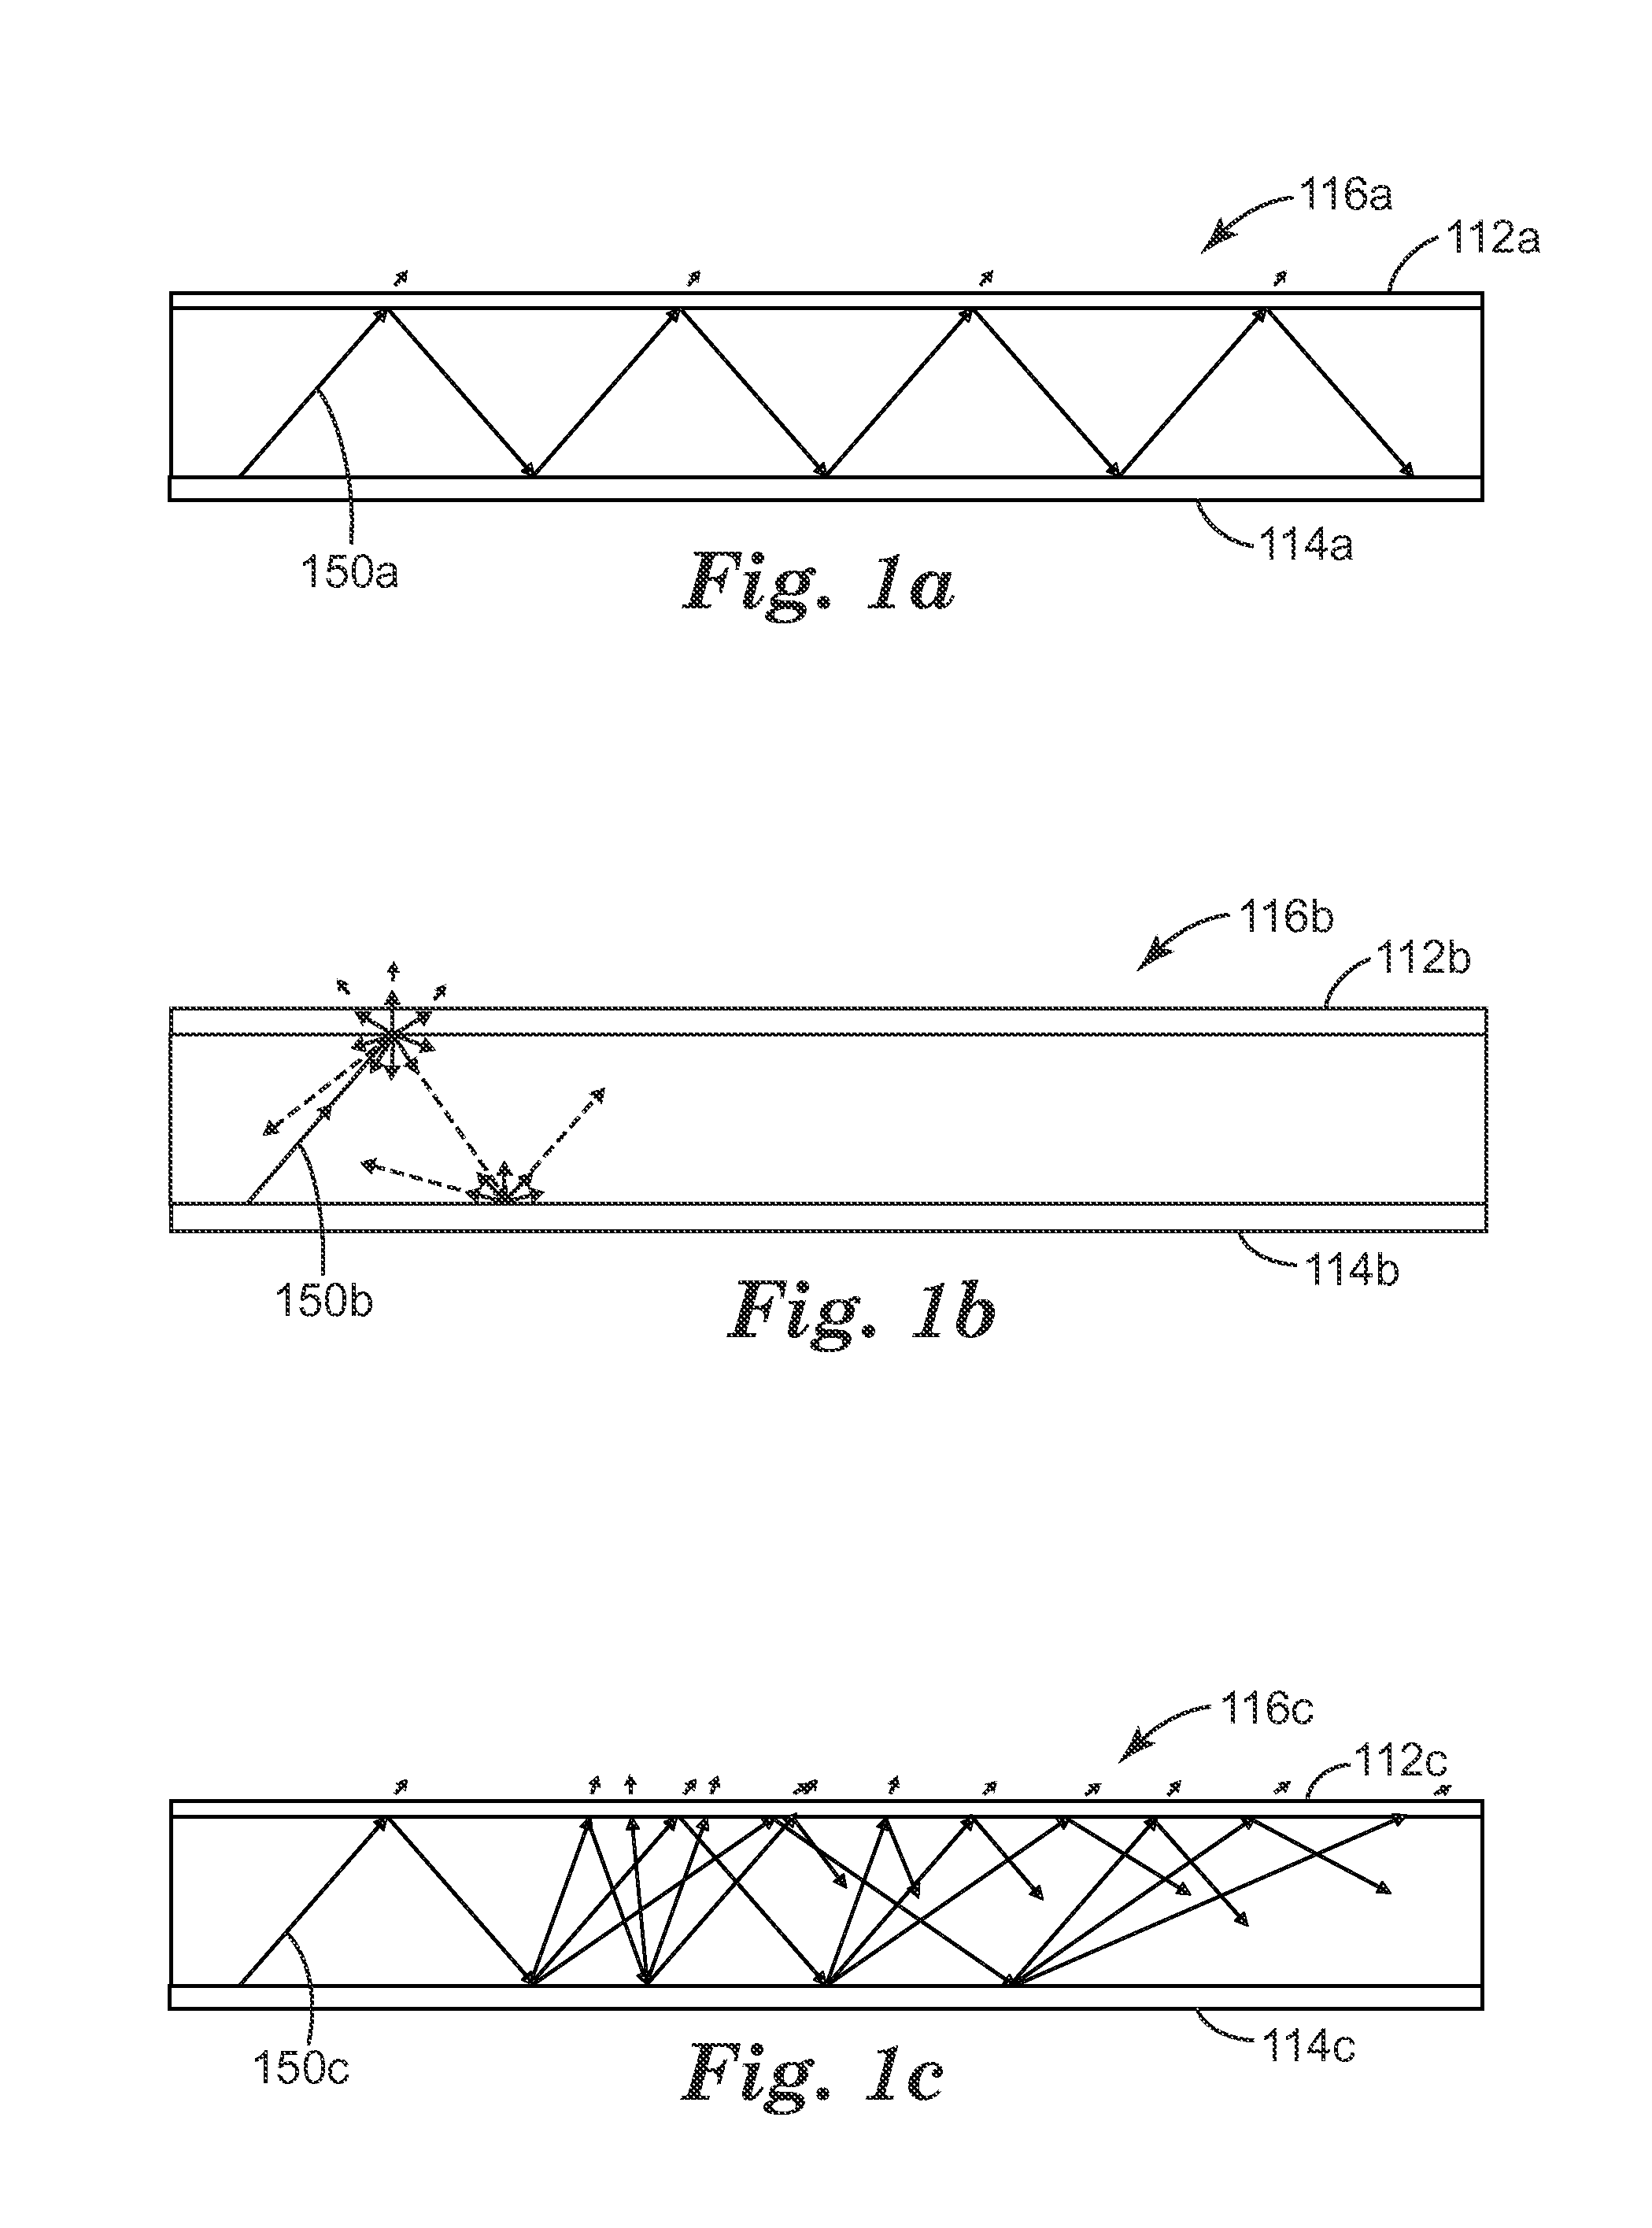 Wide band semi-specular mirror film incorporating nanovoided polymeric layer